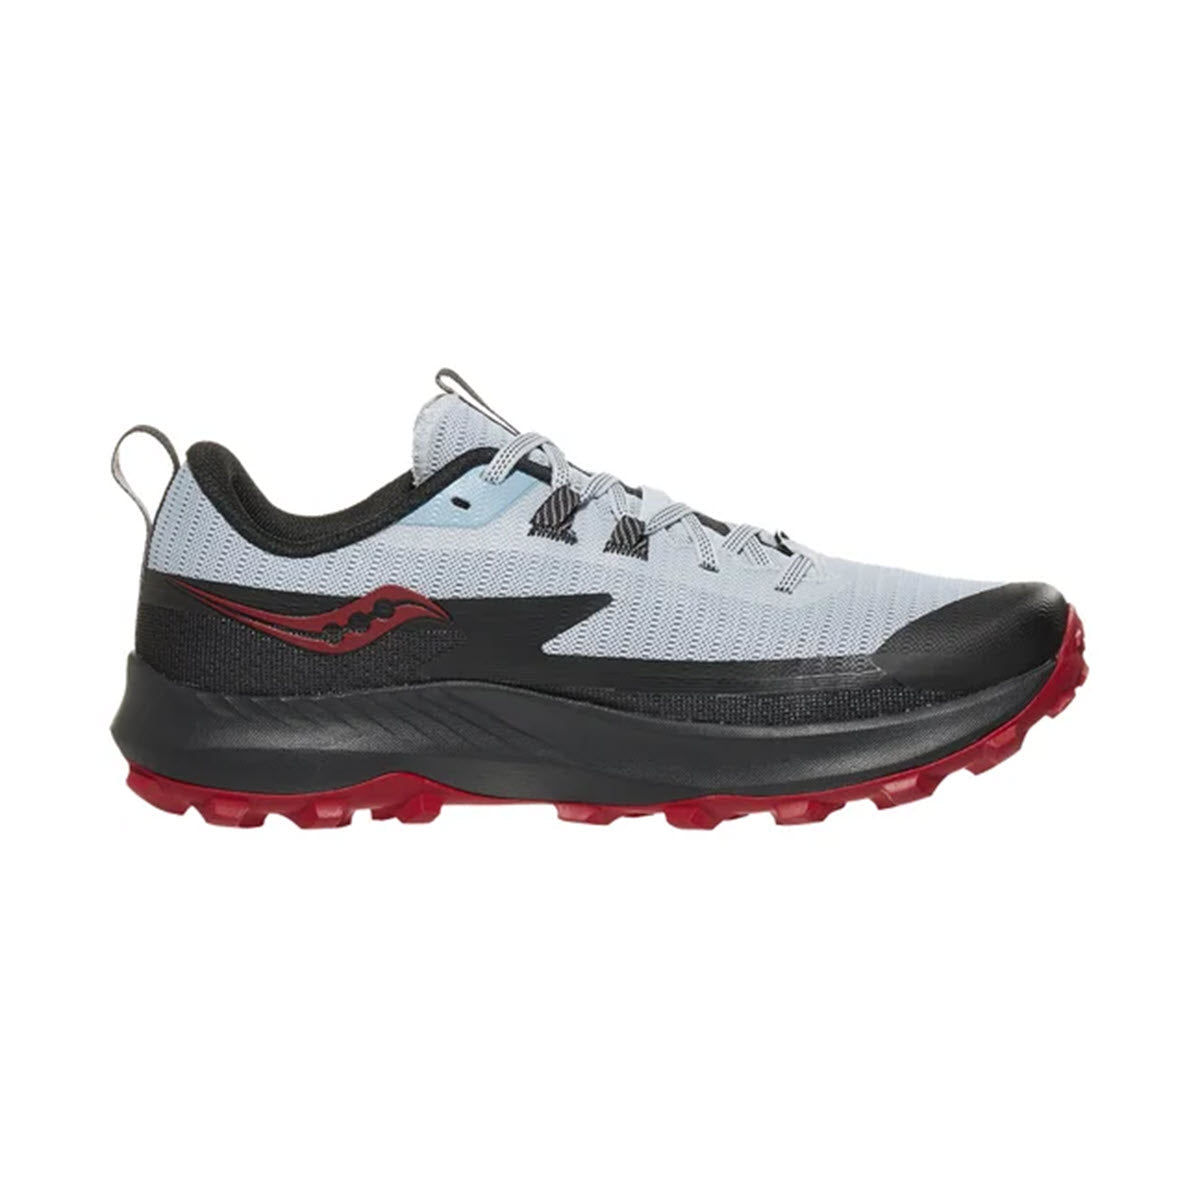 Side view of a gray and black Saucony Peregrine 13 Vapor/Poppy - Mens with red accents and rugged soles on a white background.